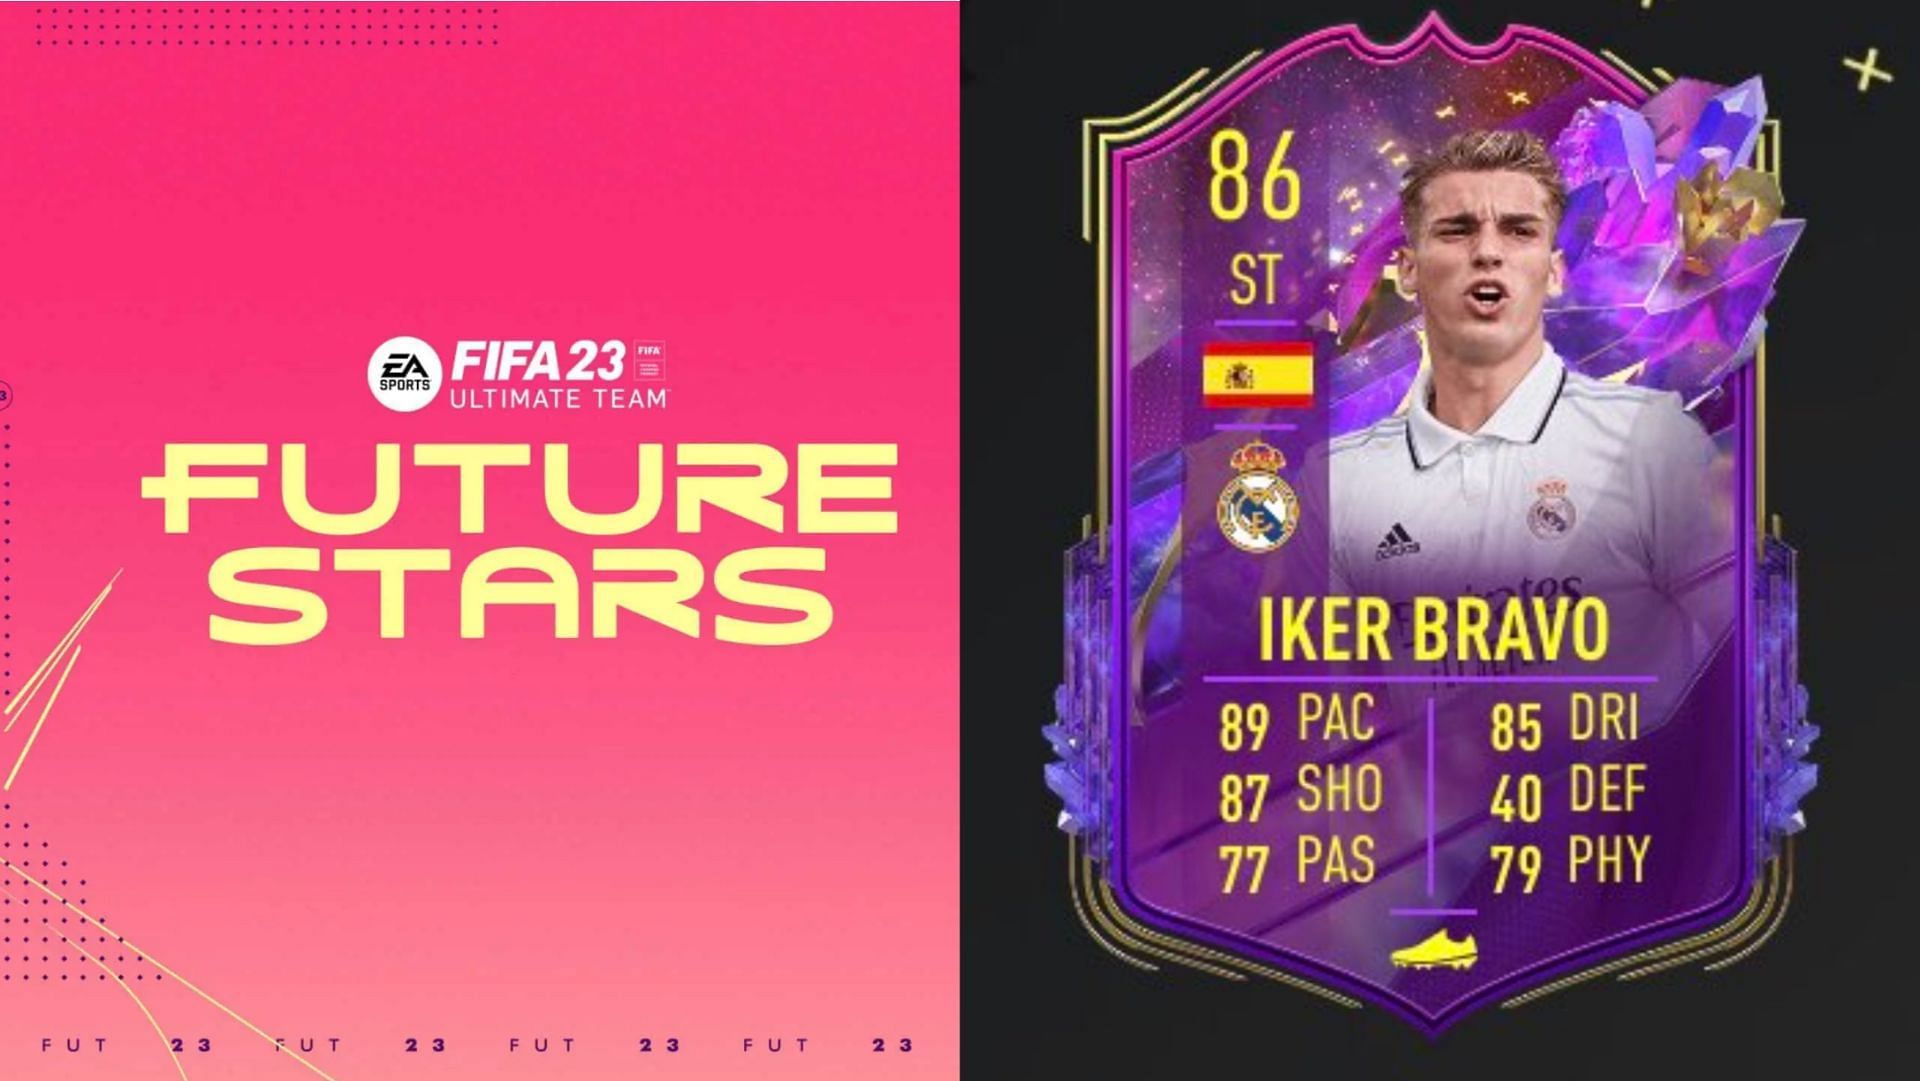 FIFA 23 players got access to a Future Stars Iker Bravo item thanks to a glitch (Images via EA Sports)